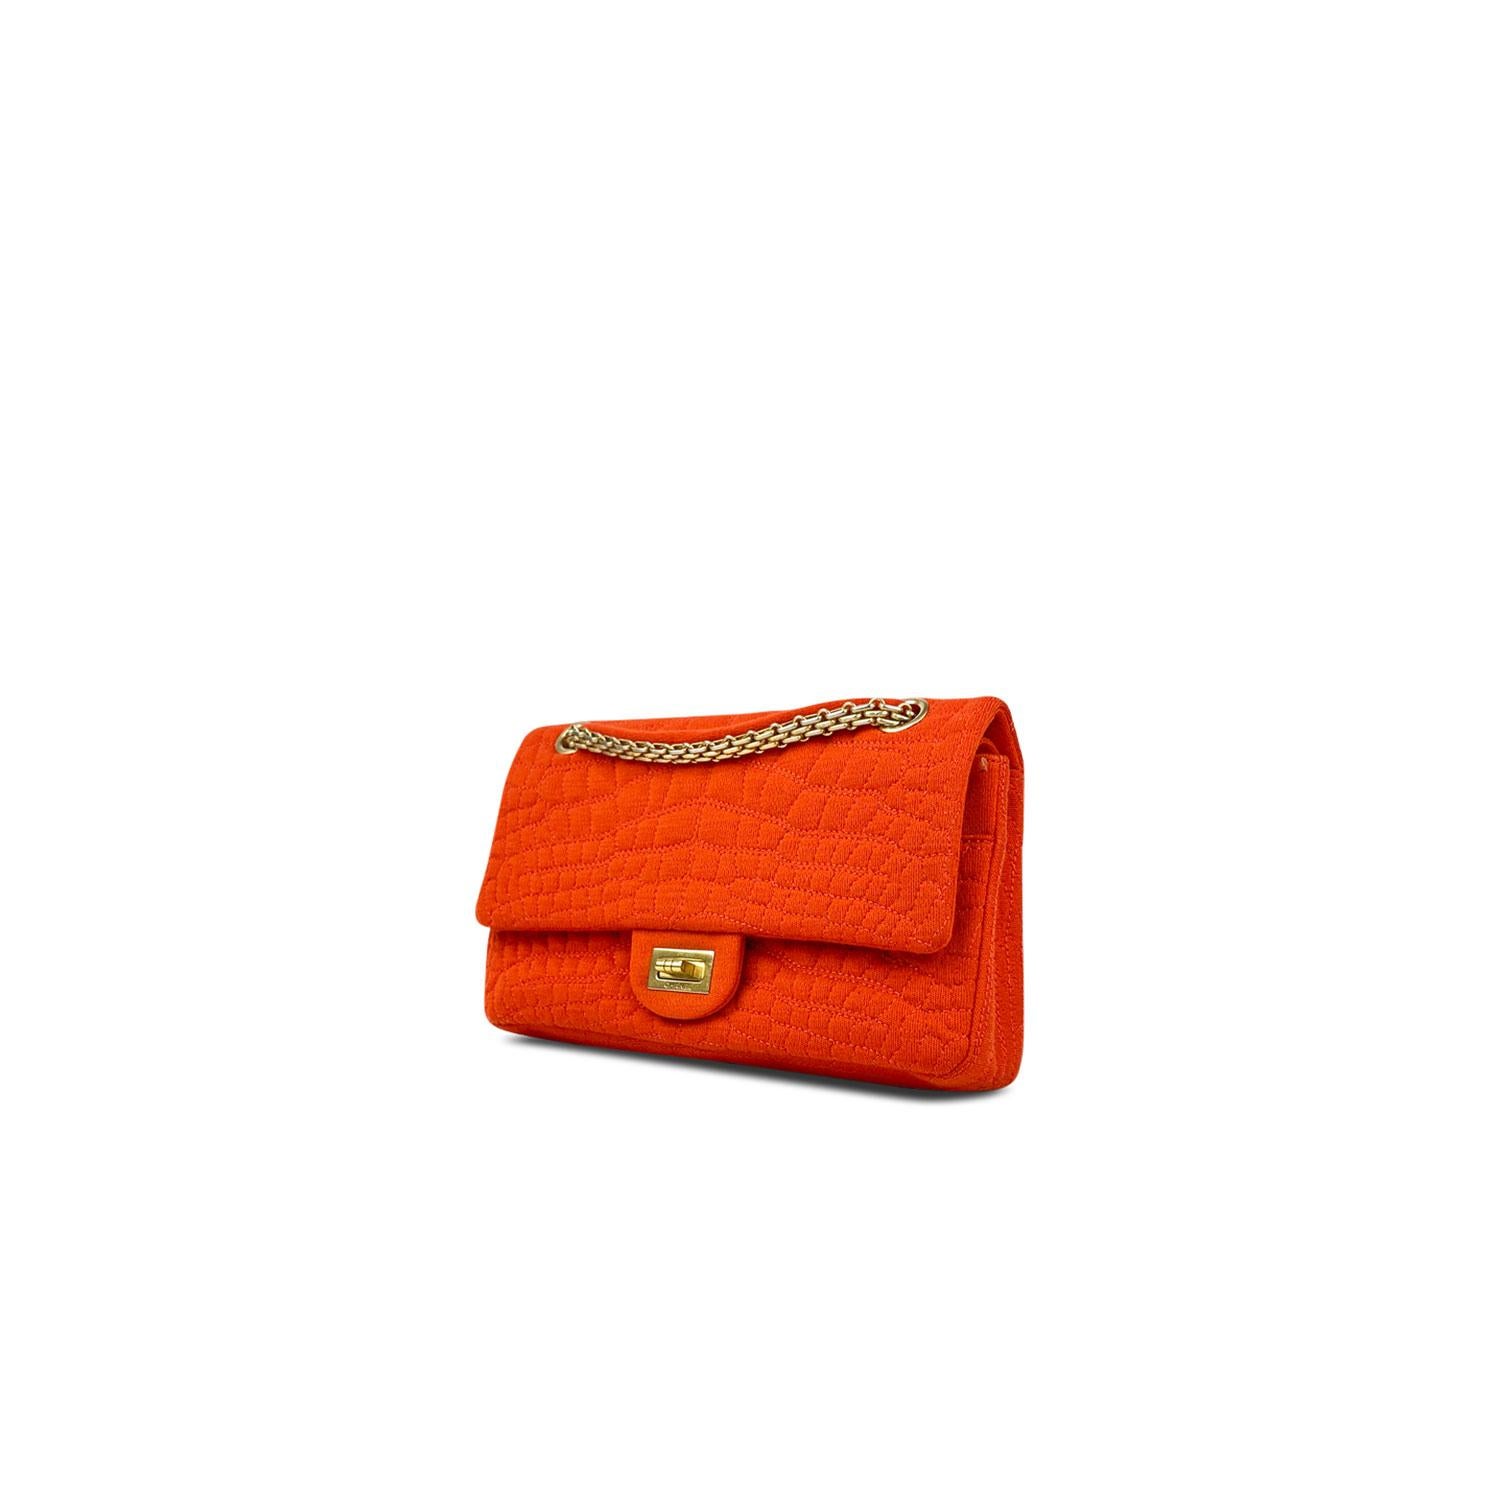 Orange jersey Chanel Croc Reissue 225 Double Flap Bag with

- Antiqued gold-tone hardware
- Convertible chain-link
- Exterior pocket at back
- Tonal grosgrain lining
- Four pockets at interior walls and Mademoiselle turn-lock closure at front